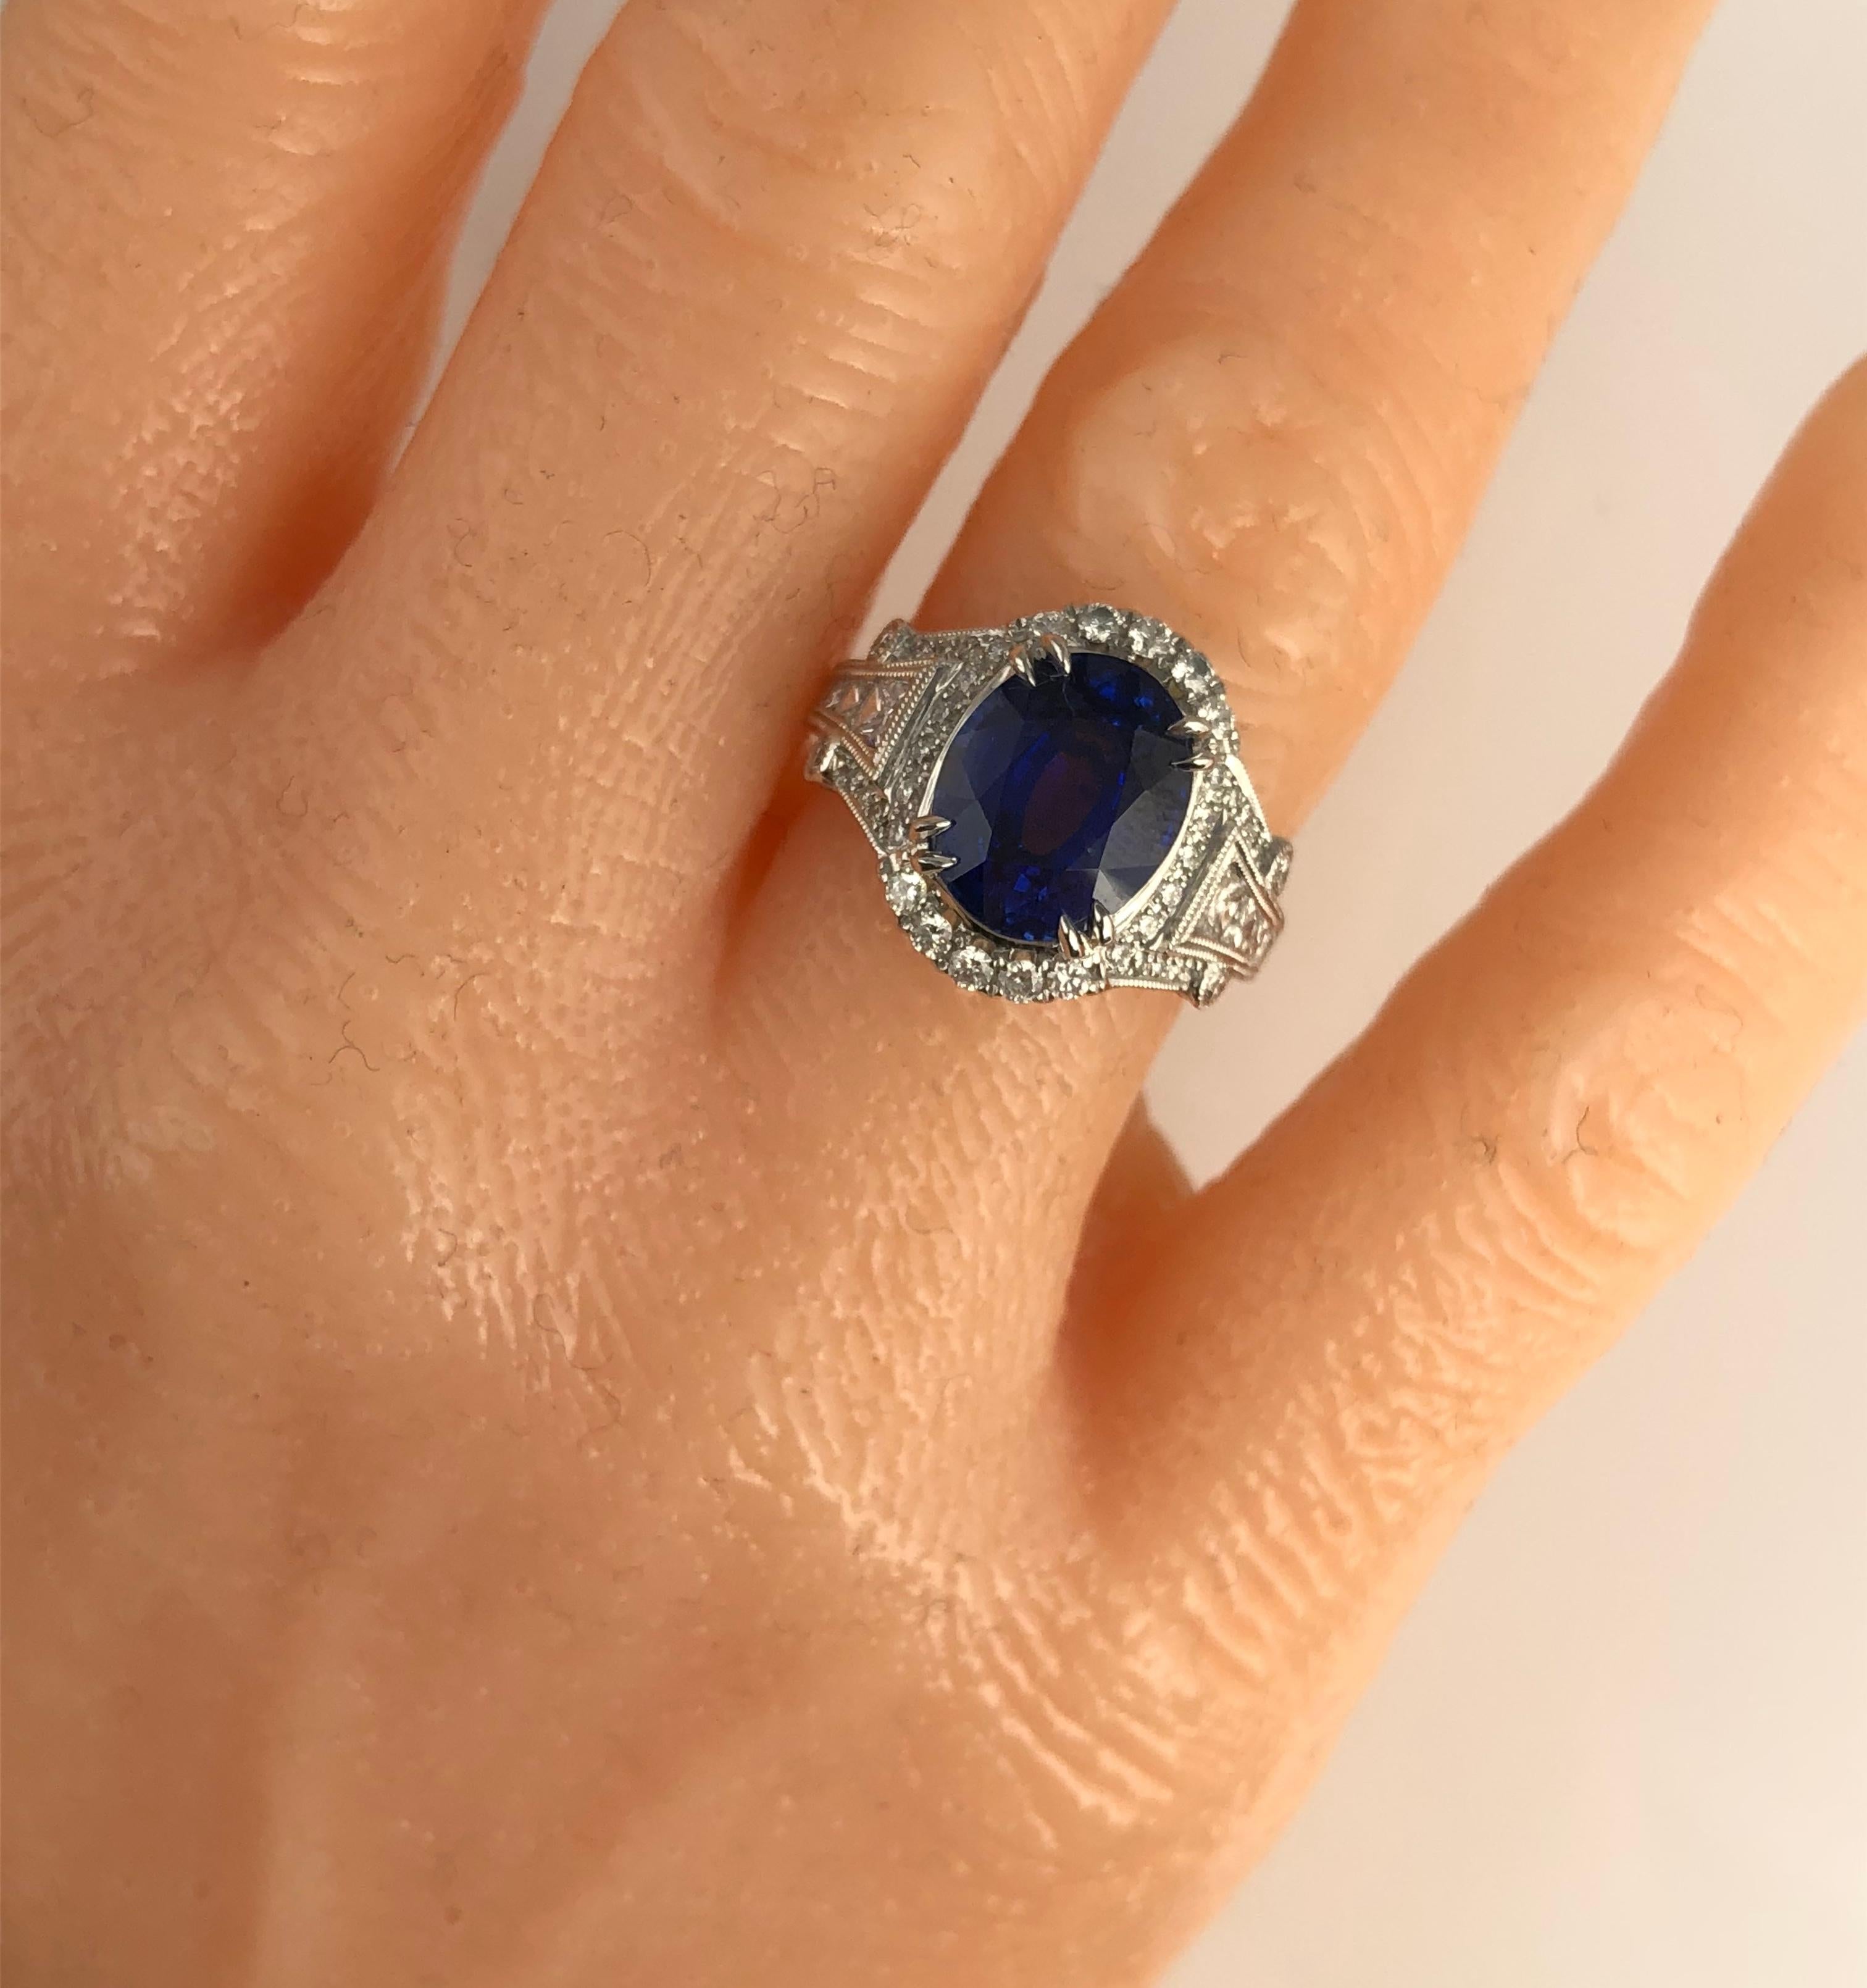 Contemporary GIA Certified 4.59 Carat Oval Cut Fine Ceylon Sapphire Ring in 18k White ref760 For Sale